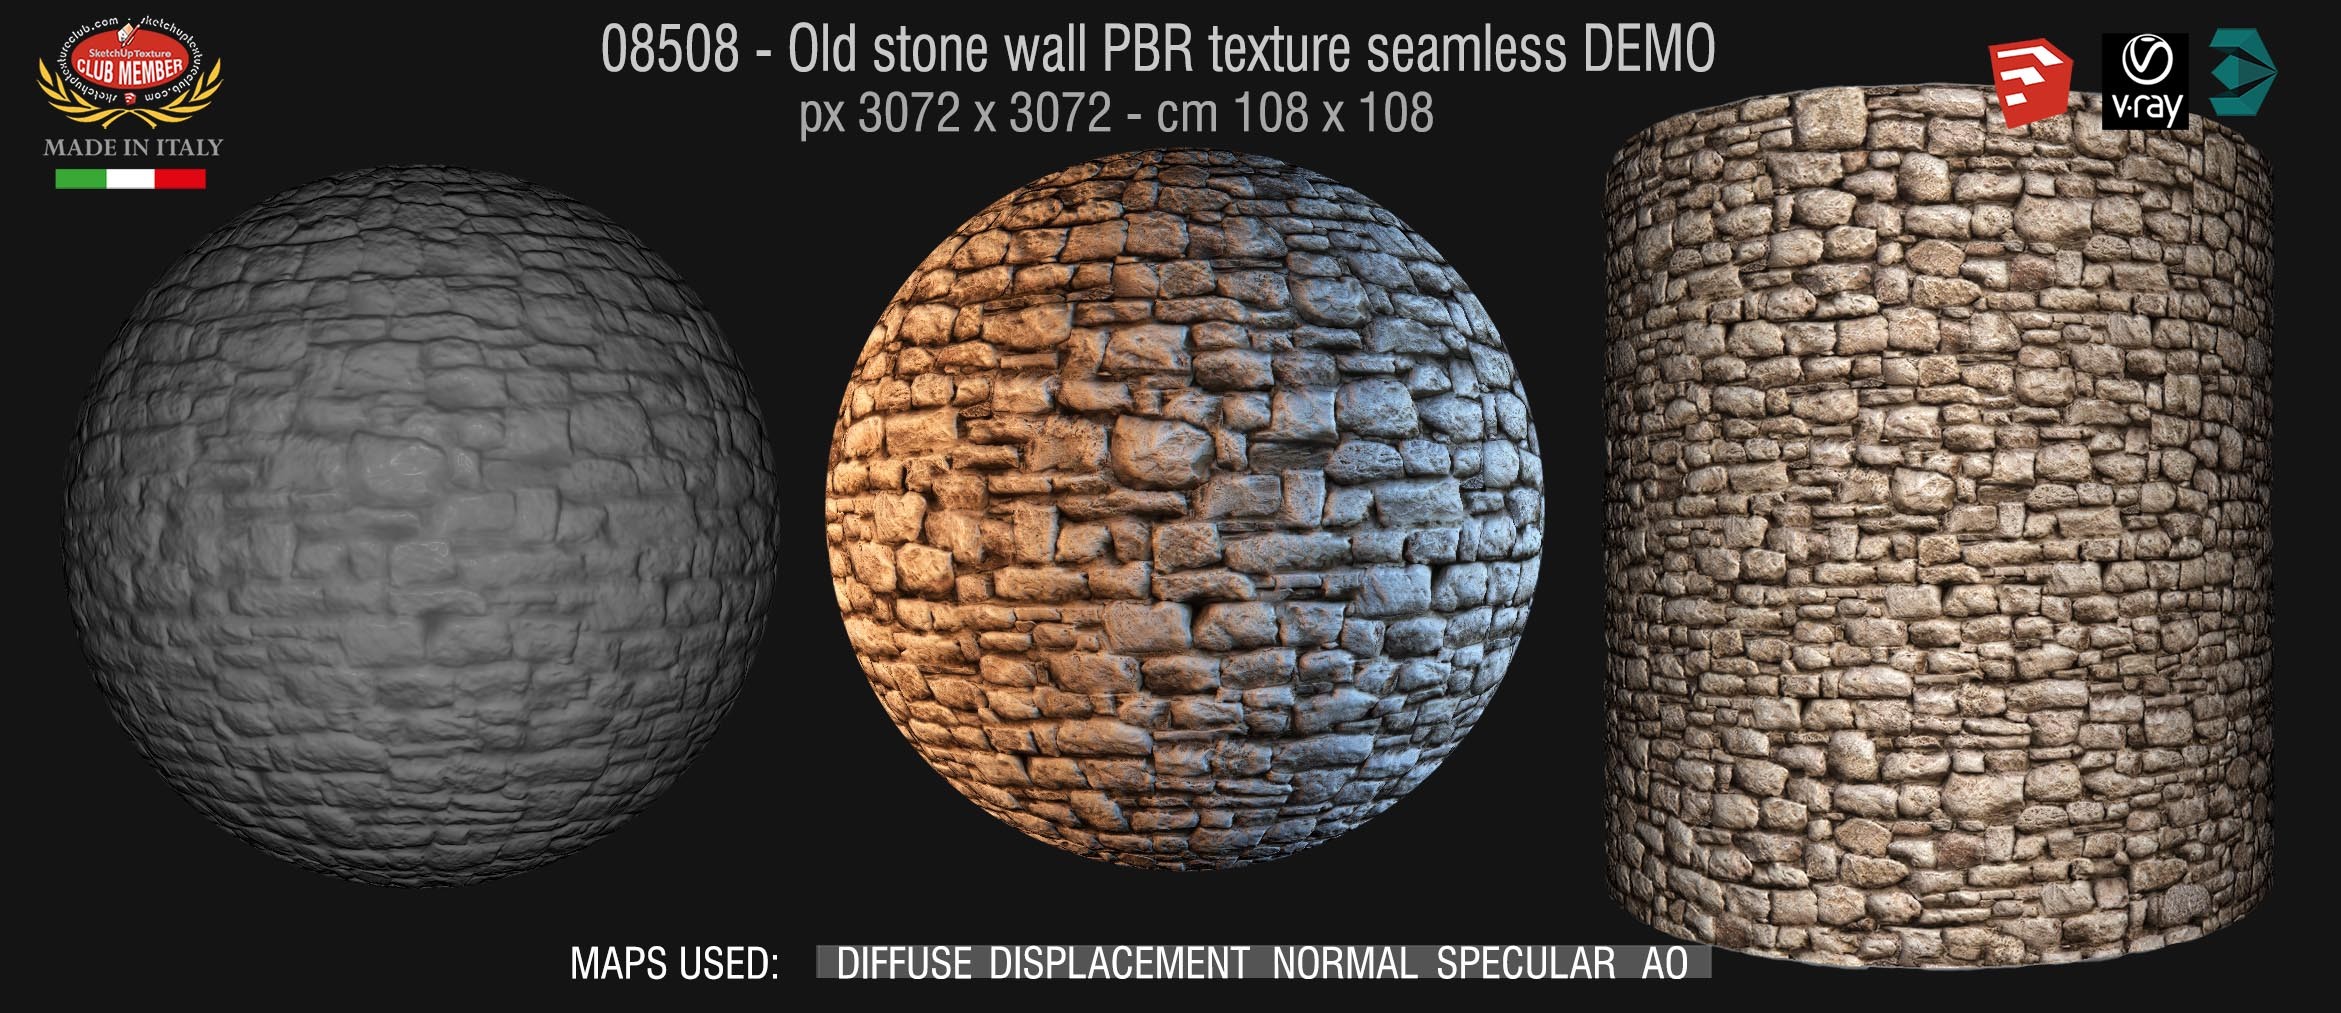 08508 Old stone wall PBR texture seamless DEMO